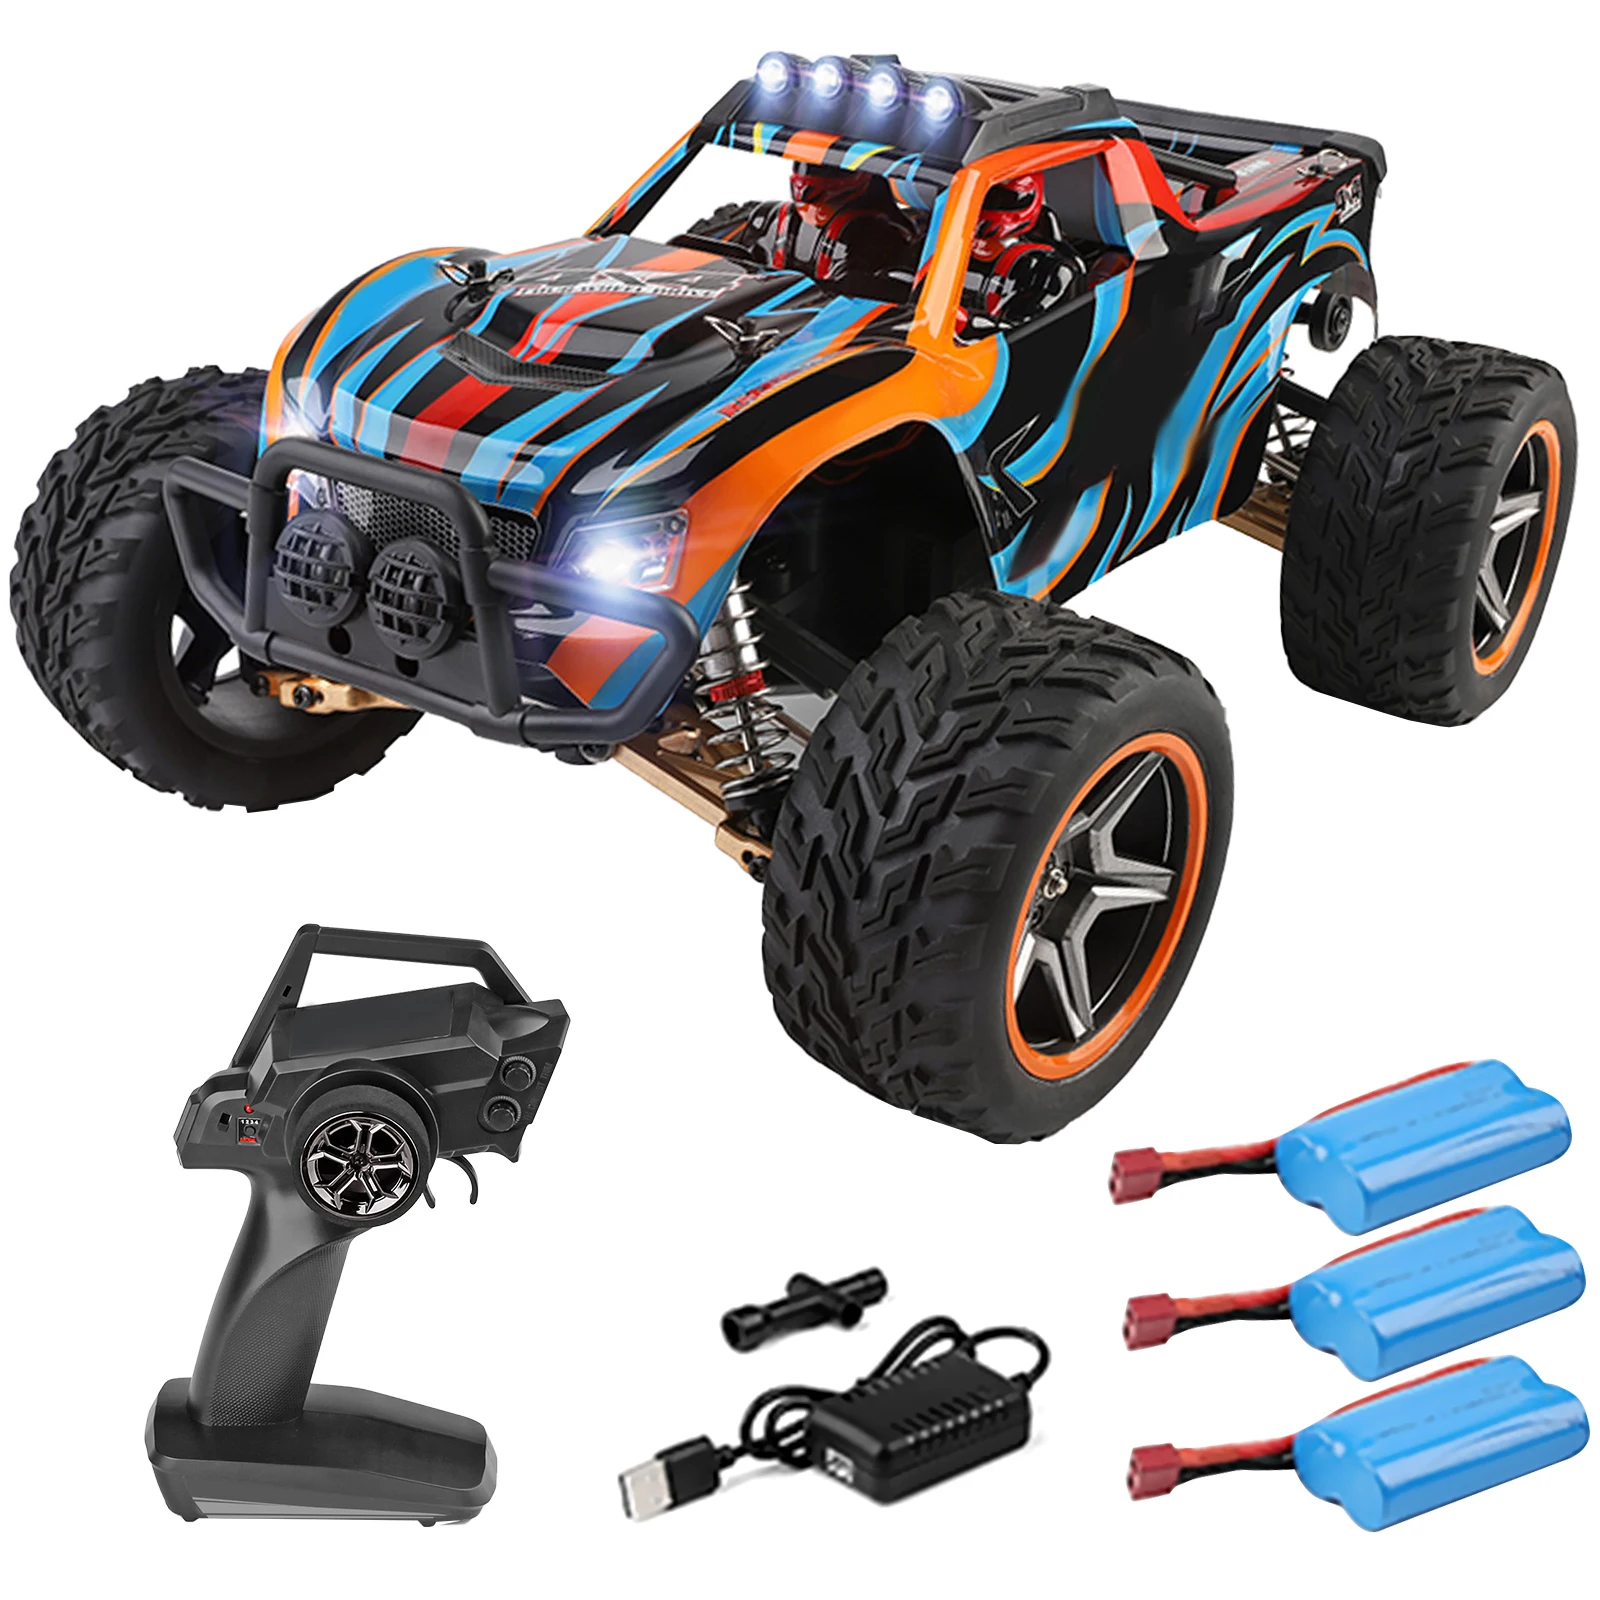 1/10 2.4Ghz RC Racing Car Off-road Car Climbing Car Remote Control Truck 4WD RTR 45km/h Powerful High Speed Motor Gifts For Kids enlarge